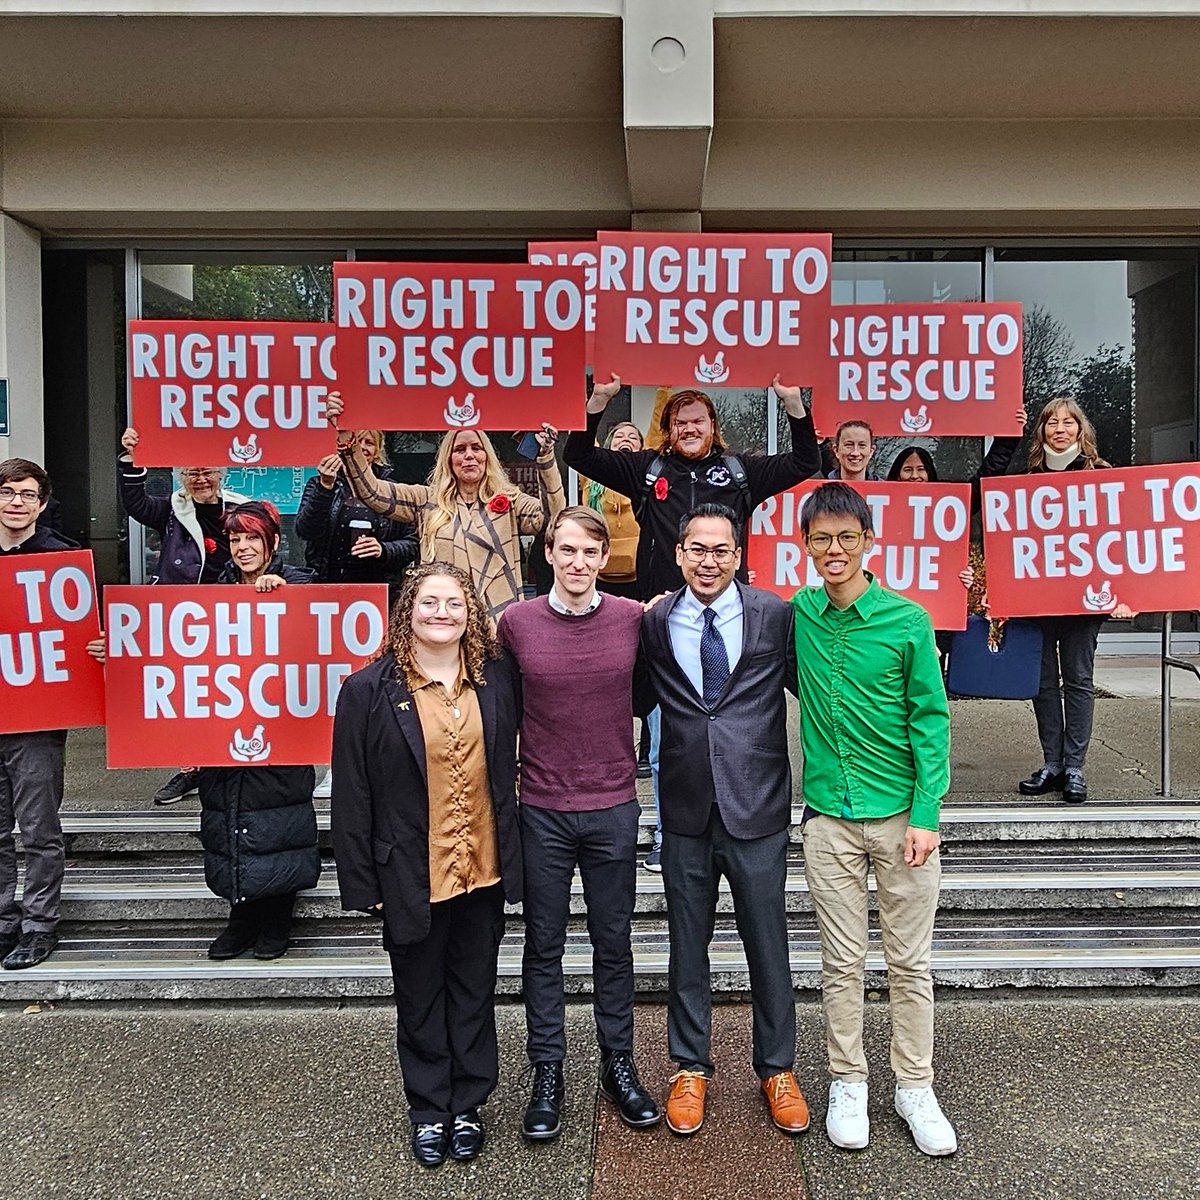 Today in the courtroom, the prosecutors declined to file charges in the Reichardt Duck Farm case, meaning the charges are still under review. As soon as there is another court date we will update you all!
Thank you all who came to court support today!
#RightToRescue